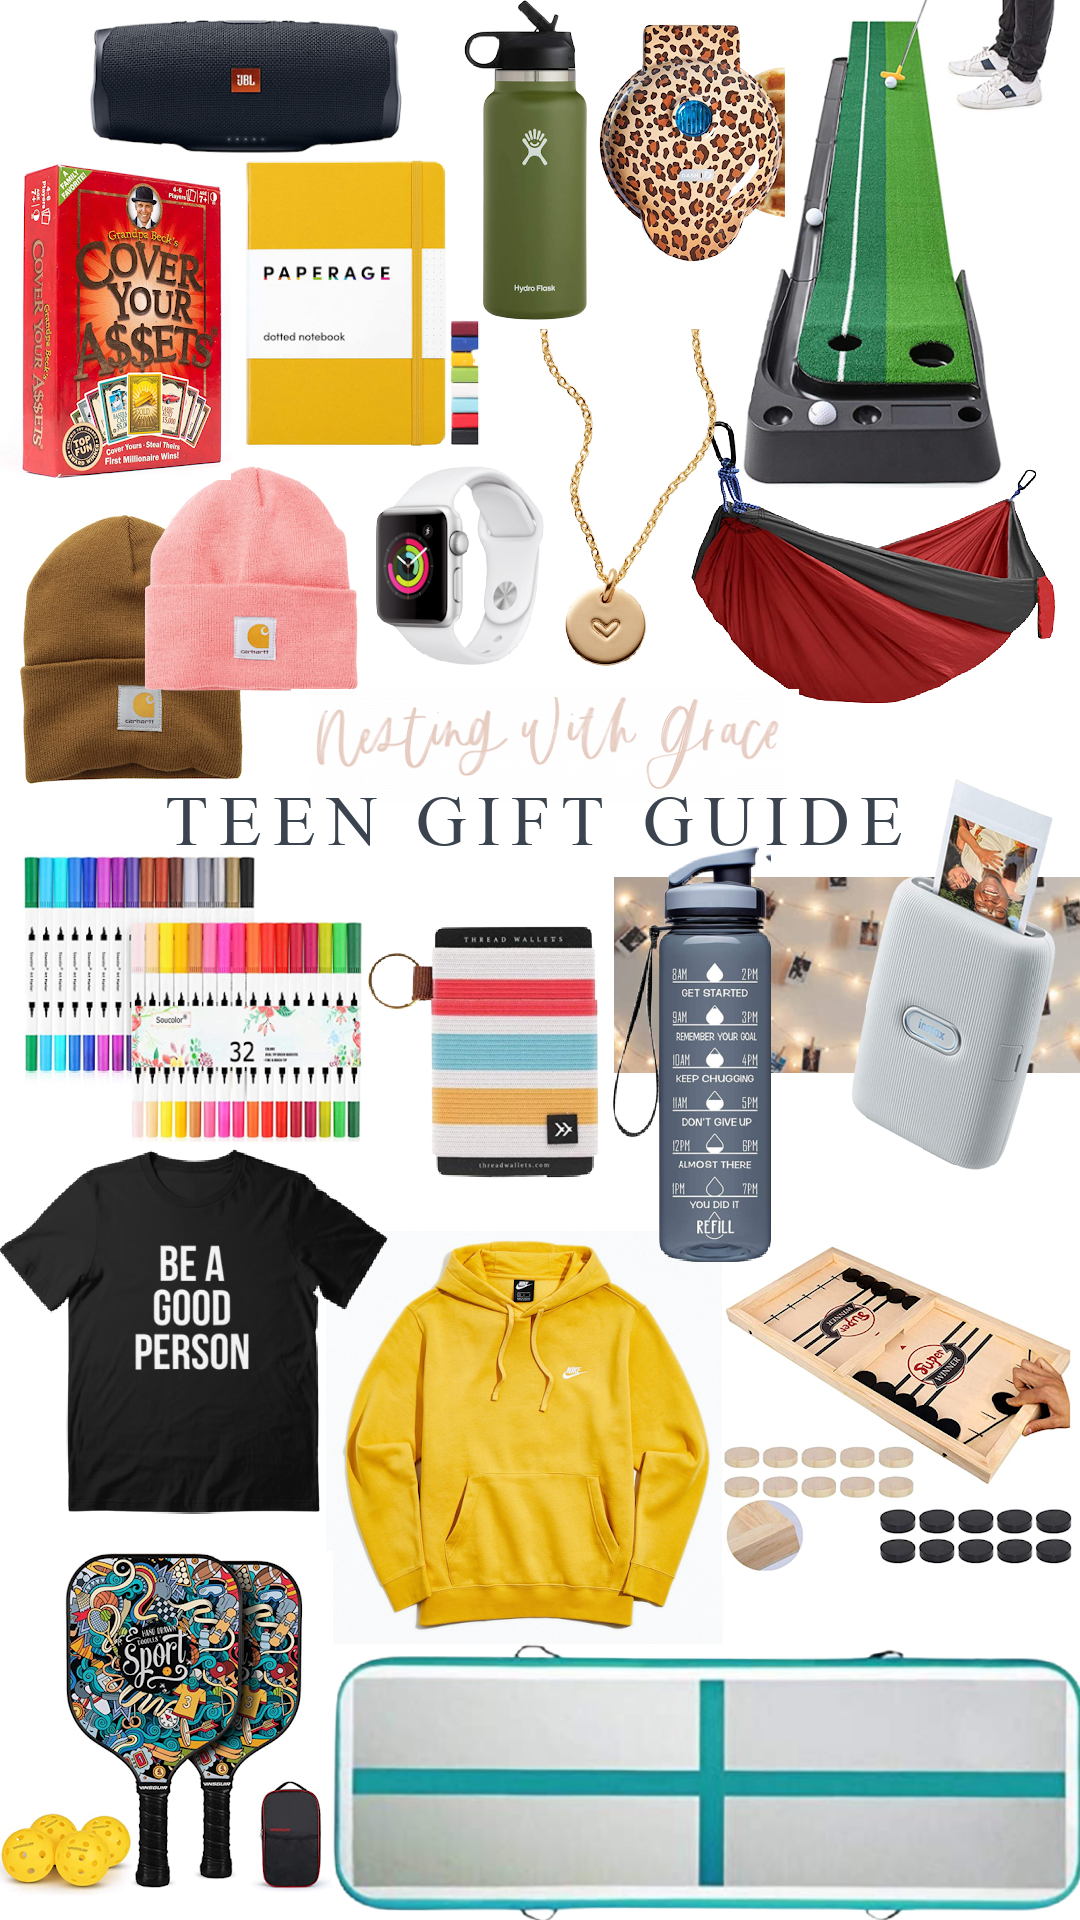 For the Teens Gift Guide - A Thoughtful Place